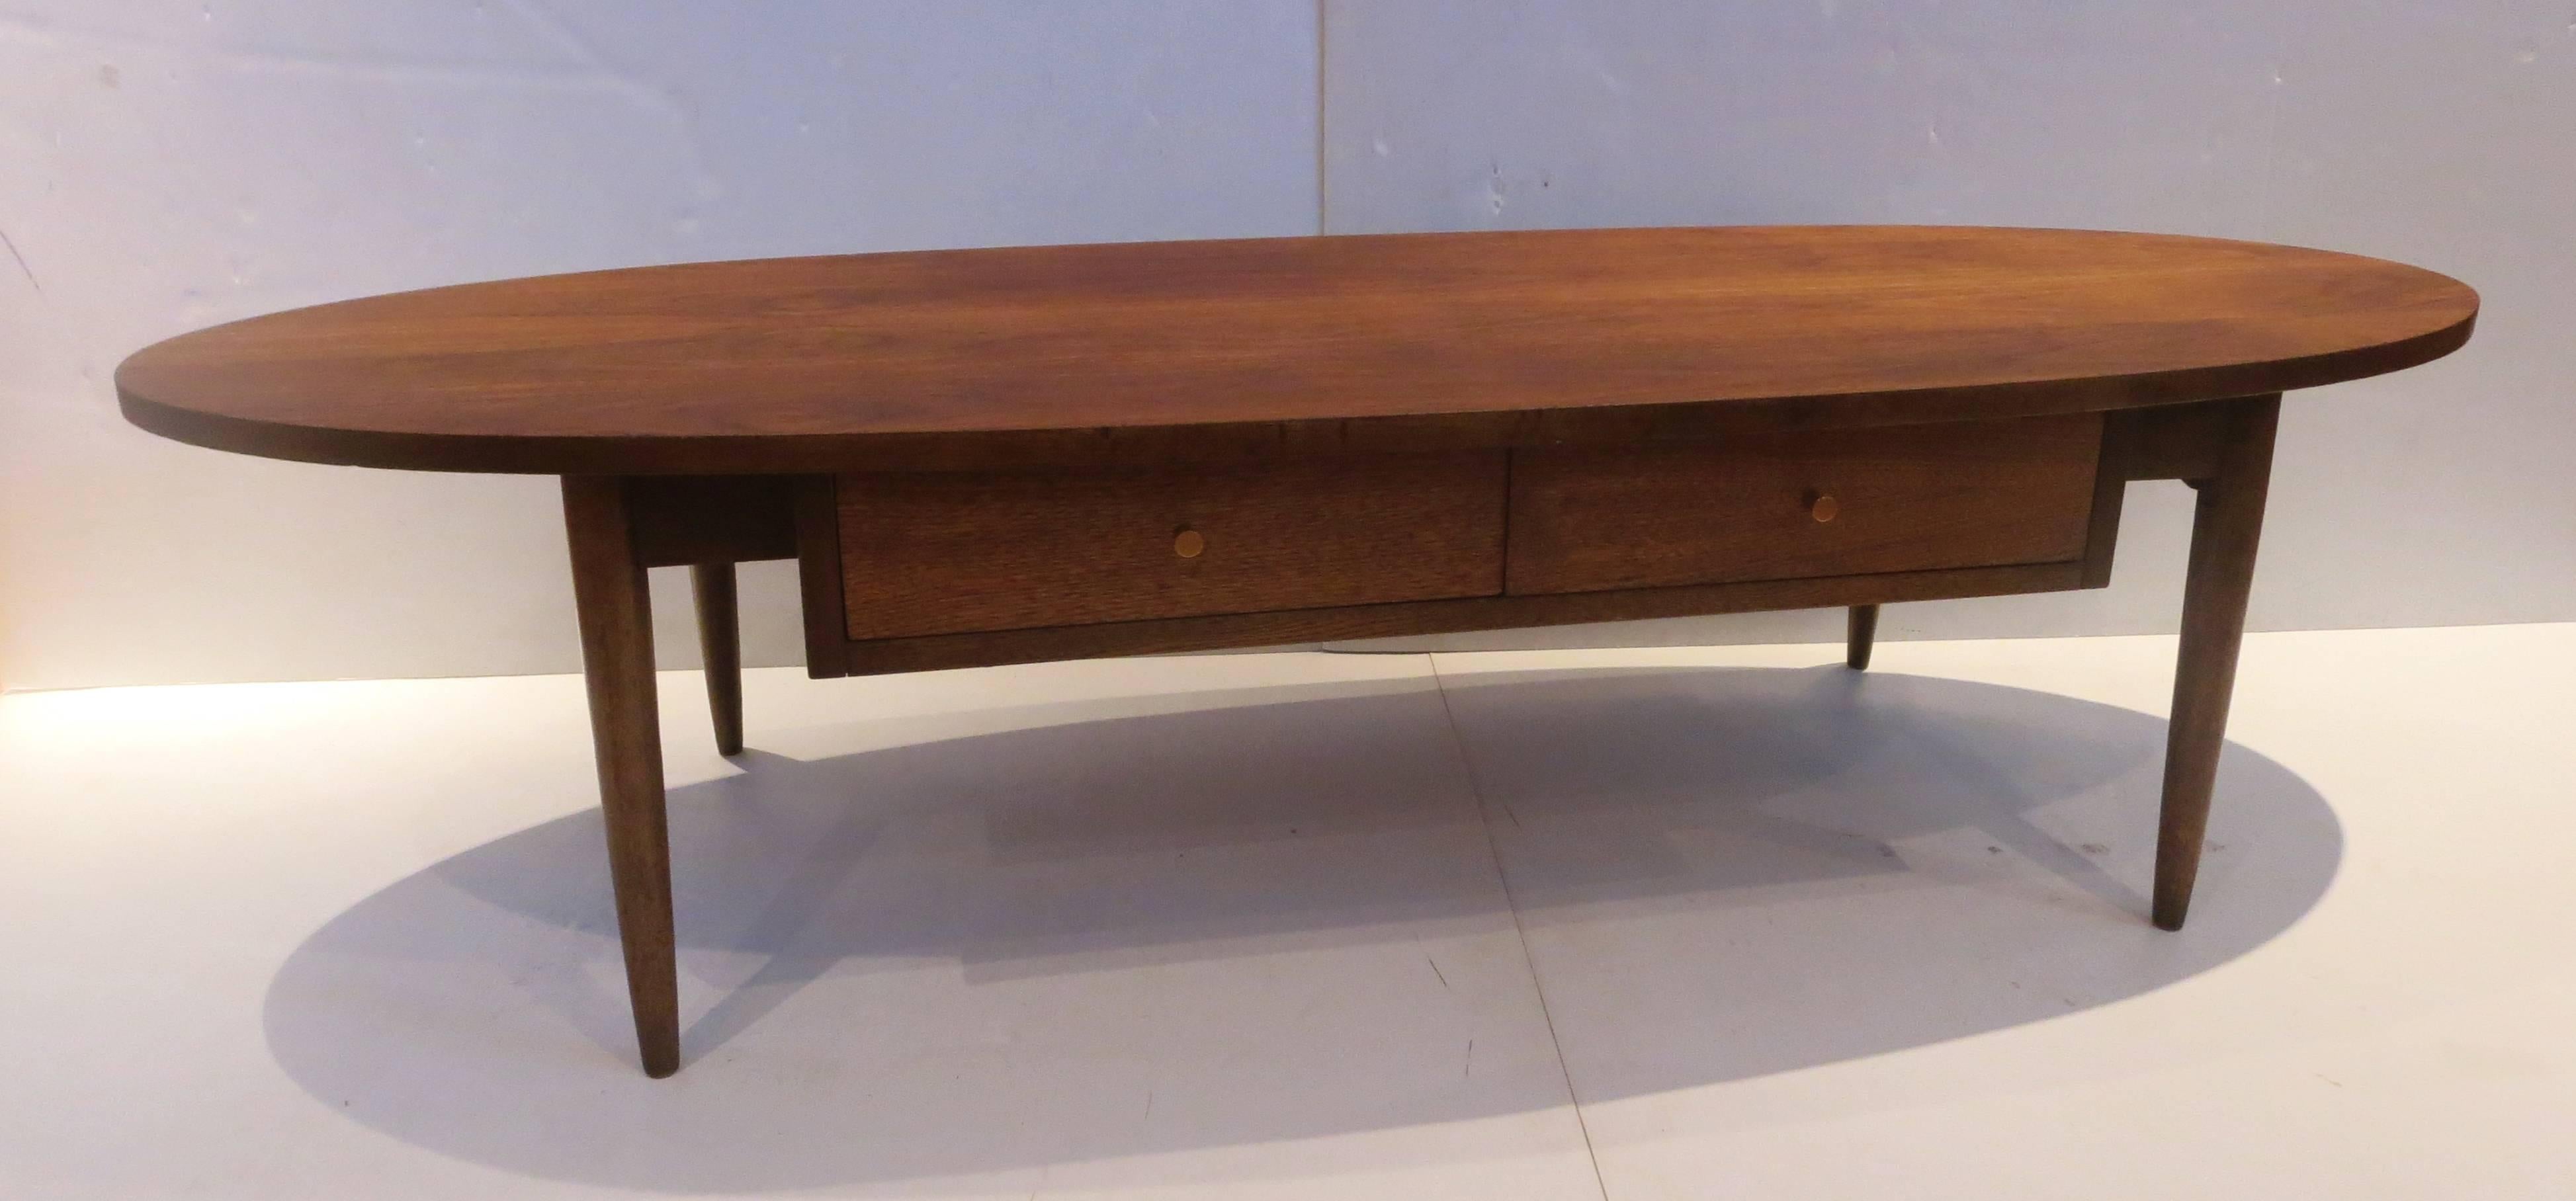 Simple and unique on this beautiful American walnut coffee table, circa 1950s in the style of Paul McCobb, freshly refinished, solid and sturdy nice condition. With two single small drawer compartments.